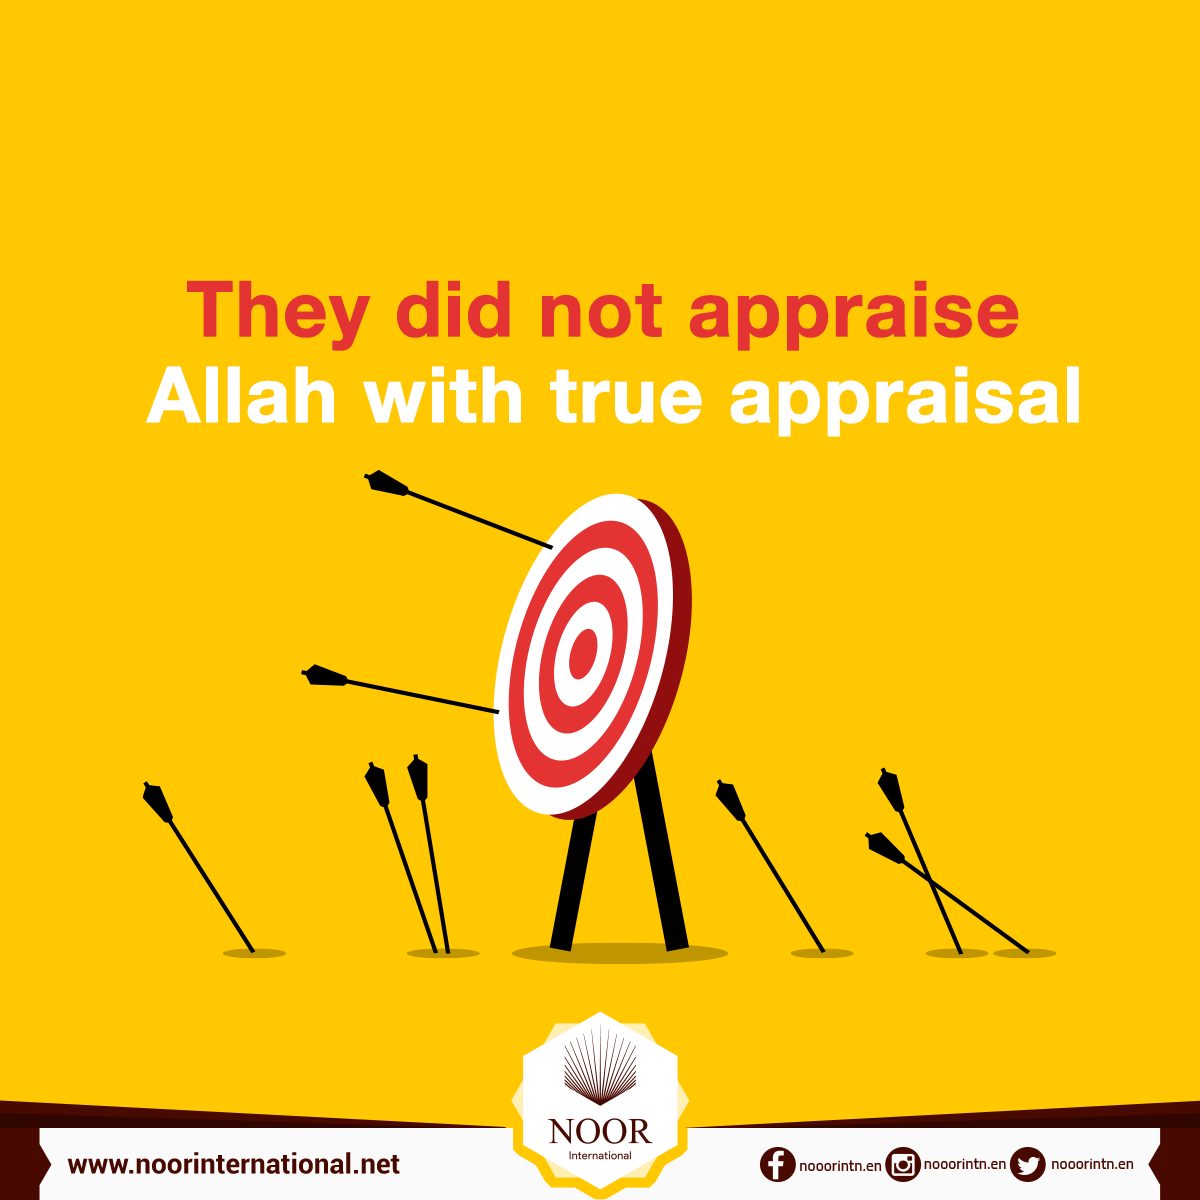 They did not appraise Allah with true appraisal